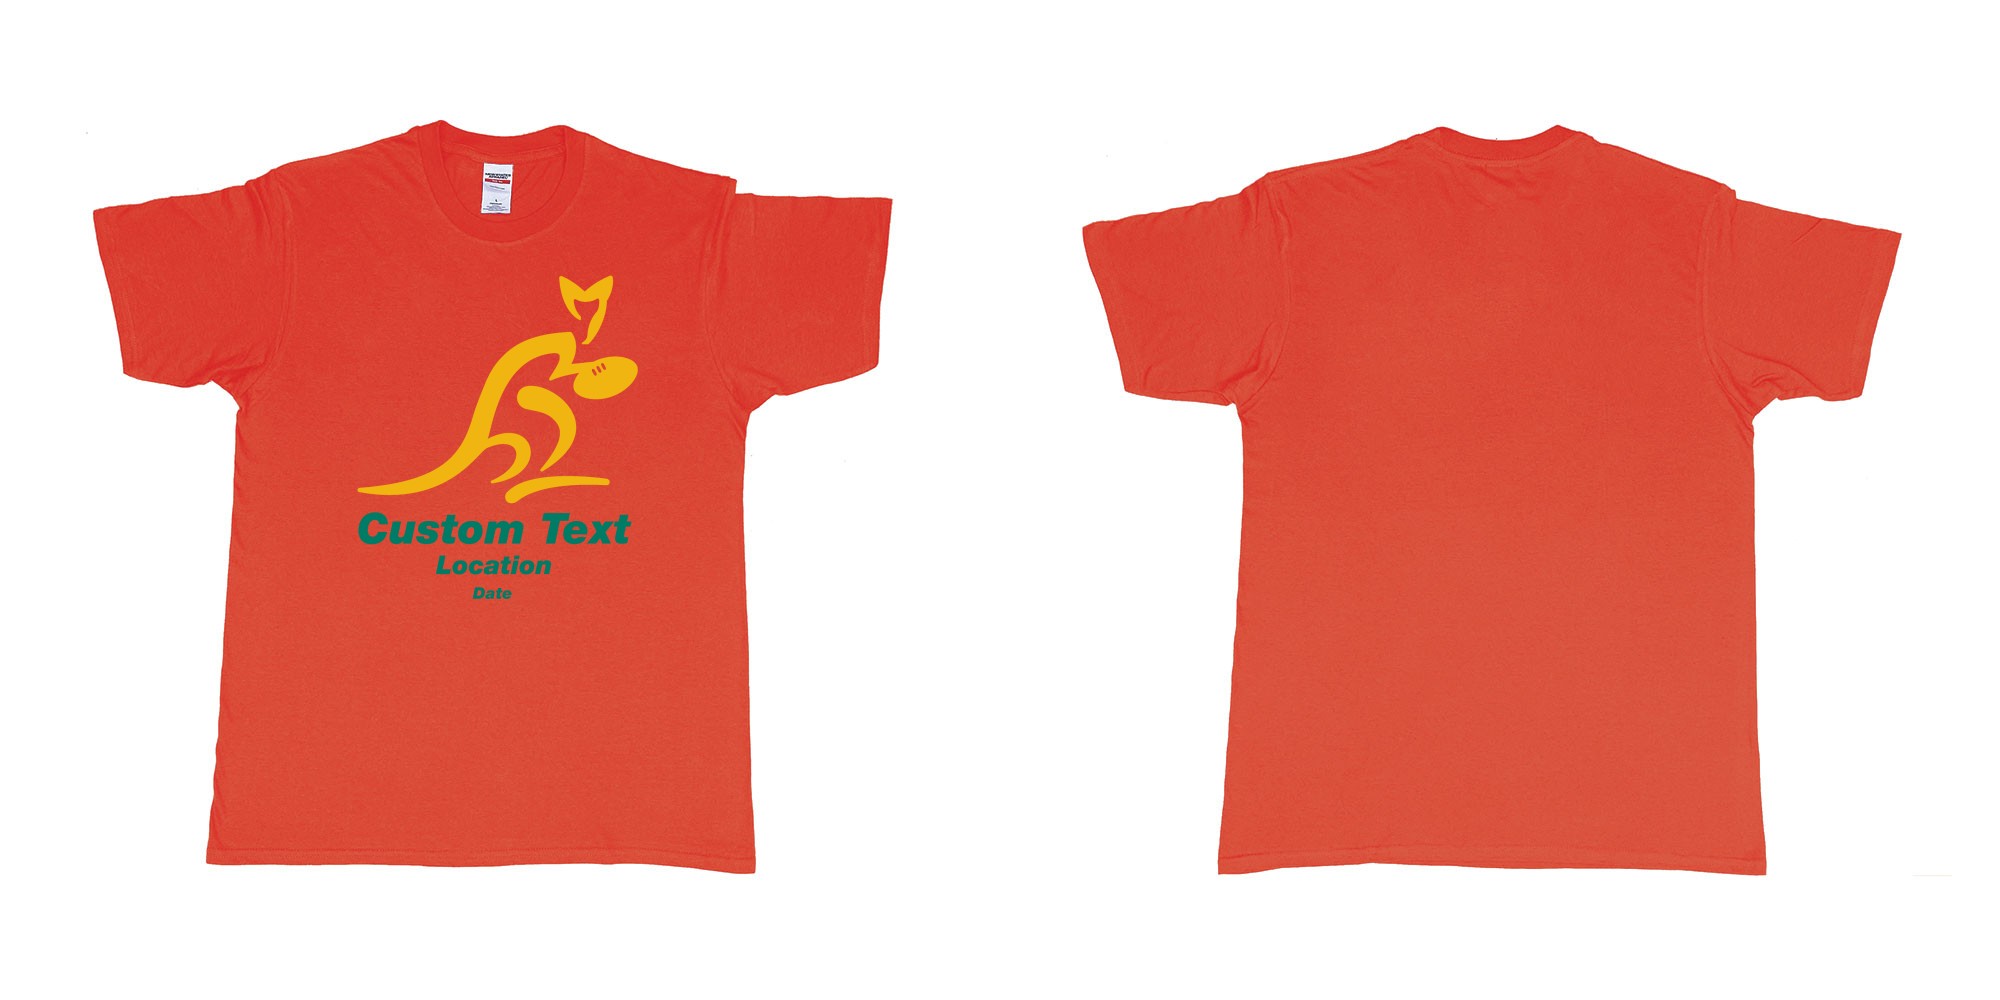 Custom tshirt design australia national rugby union team the wallabies in fabric color red choice your own text made in Bali by The Pirate Way